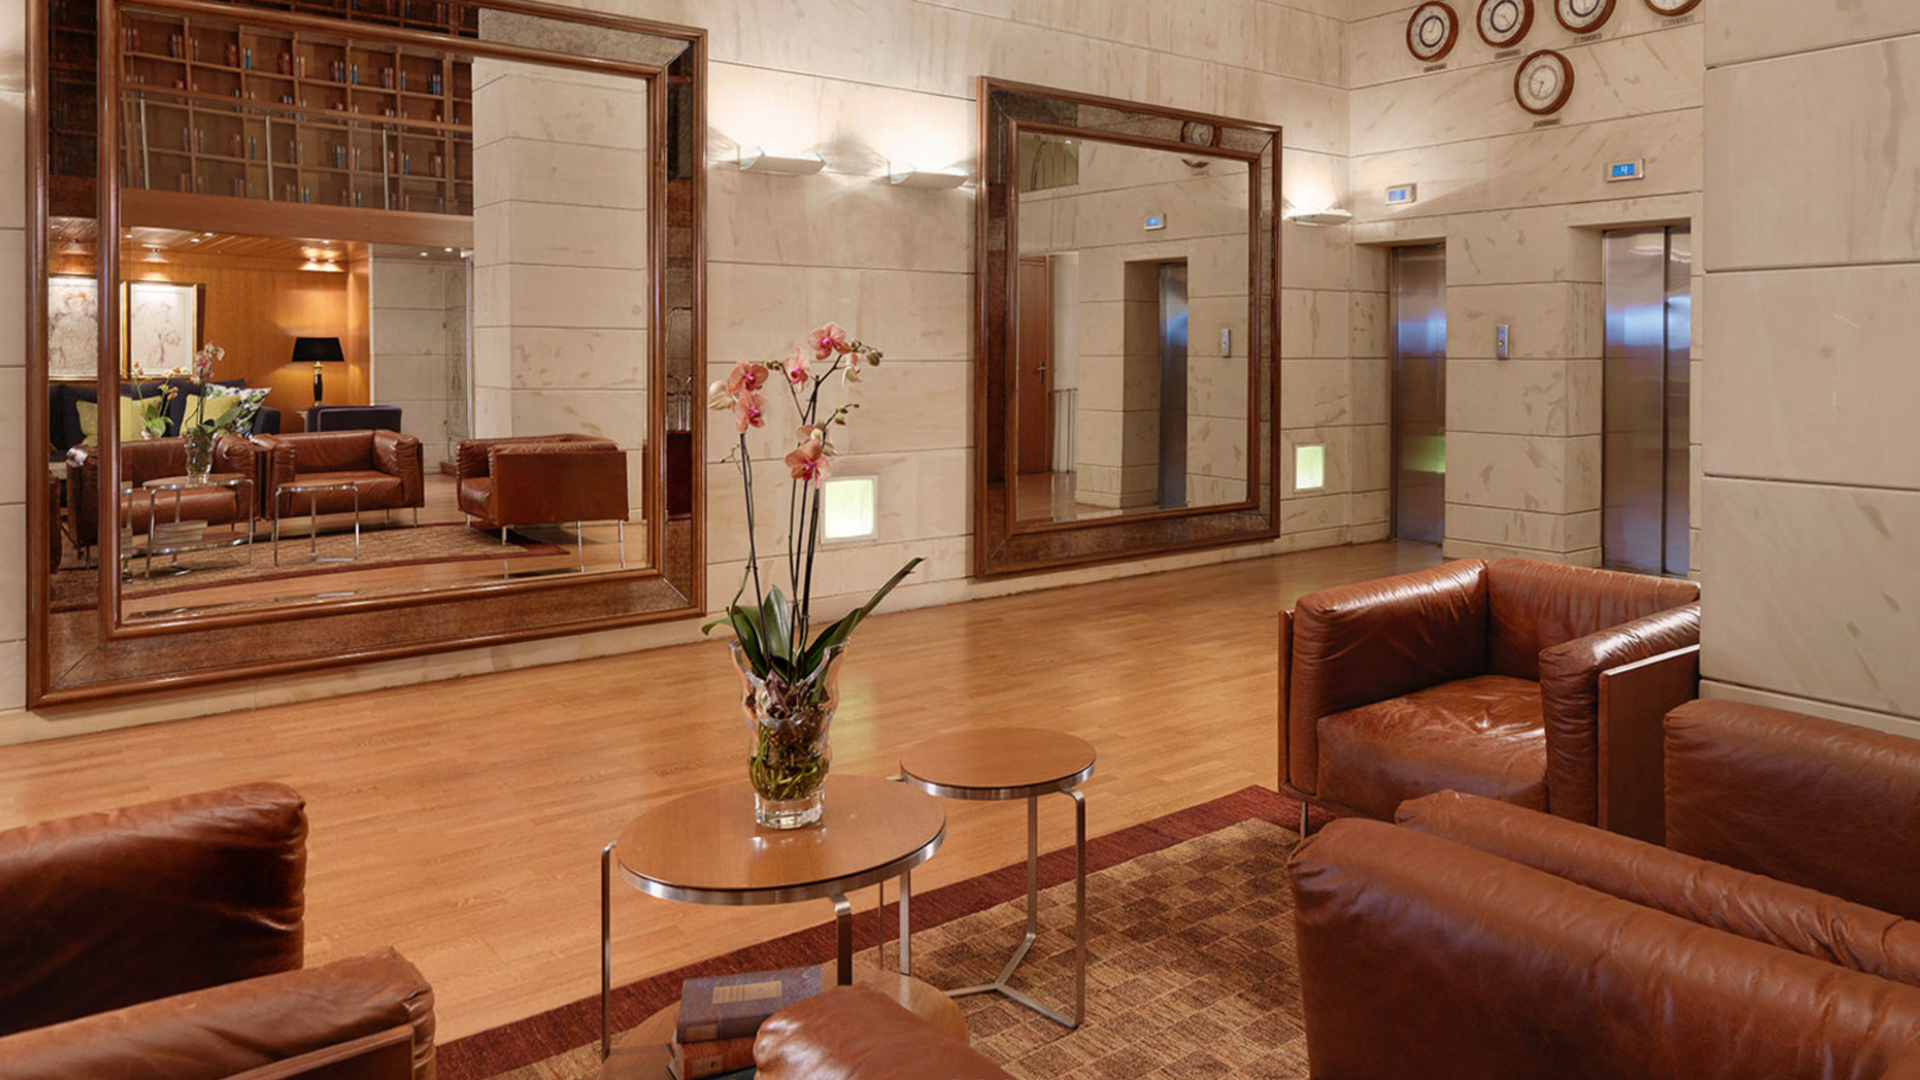 Athens Hotels near Acropolis and shuls - lounge